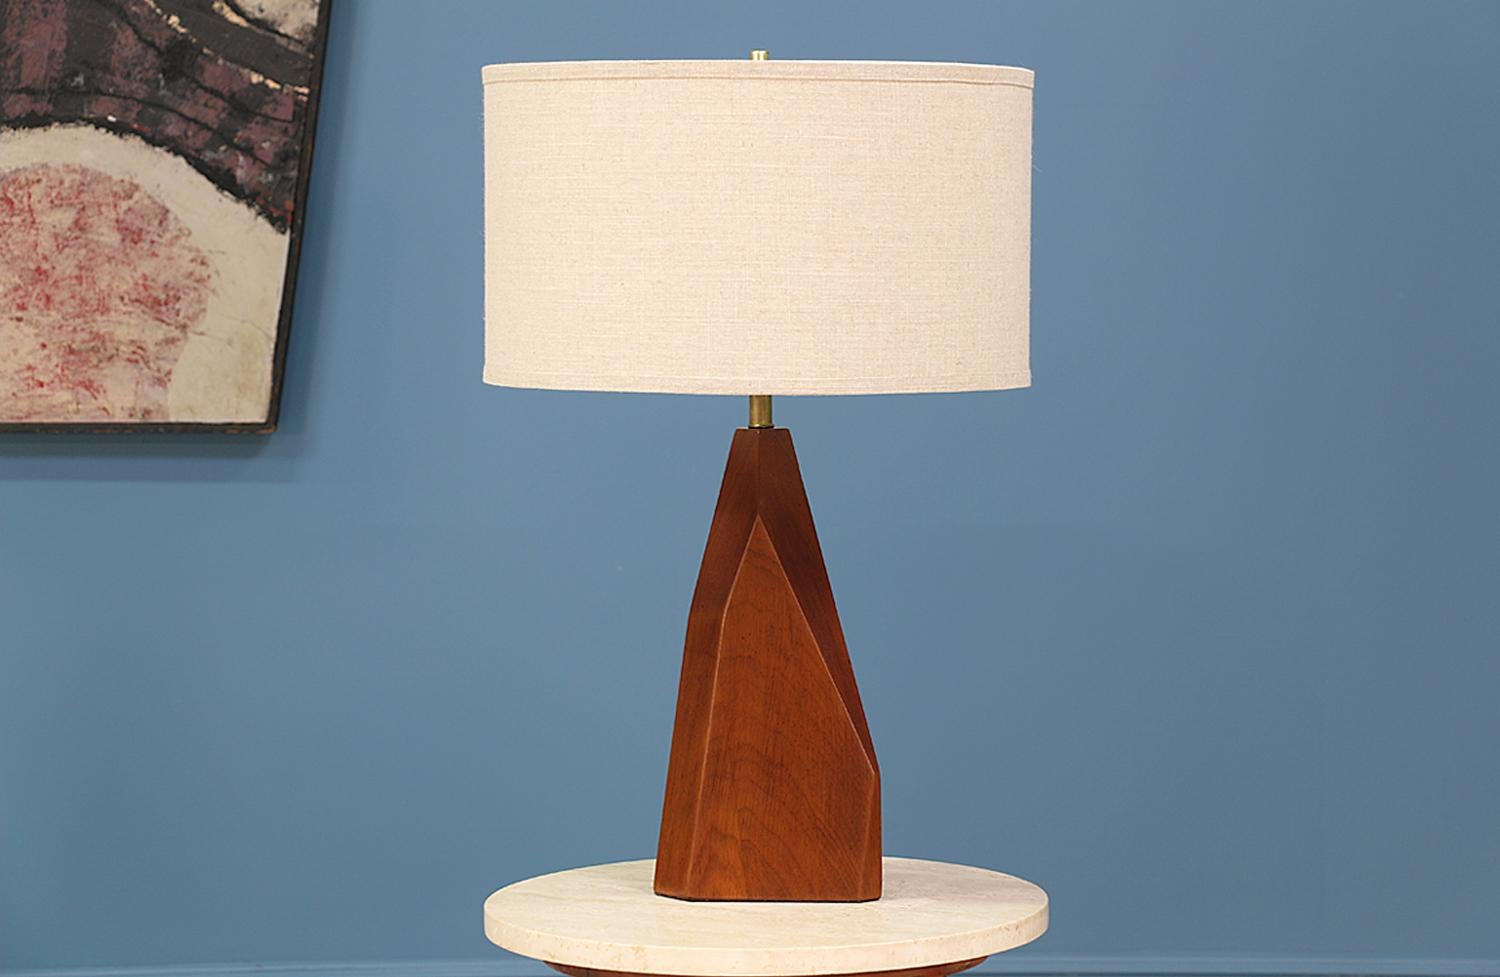 Mid-Century Modern table lamp designed and manufactured in the United States in the 1950’s. Featuring a geometric walnut foundation and new brass hardware, this items body combines different lines and cuts giving it an abstract shape. Newly rewired